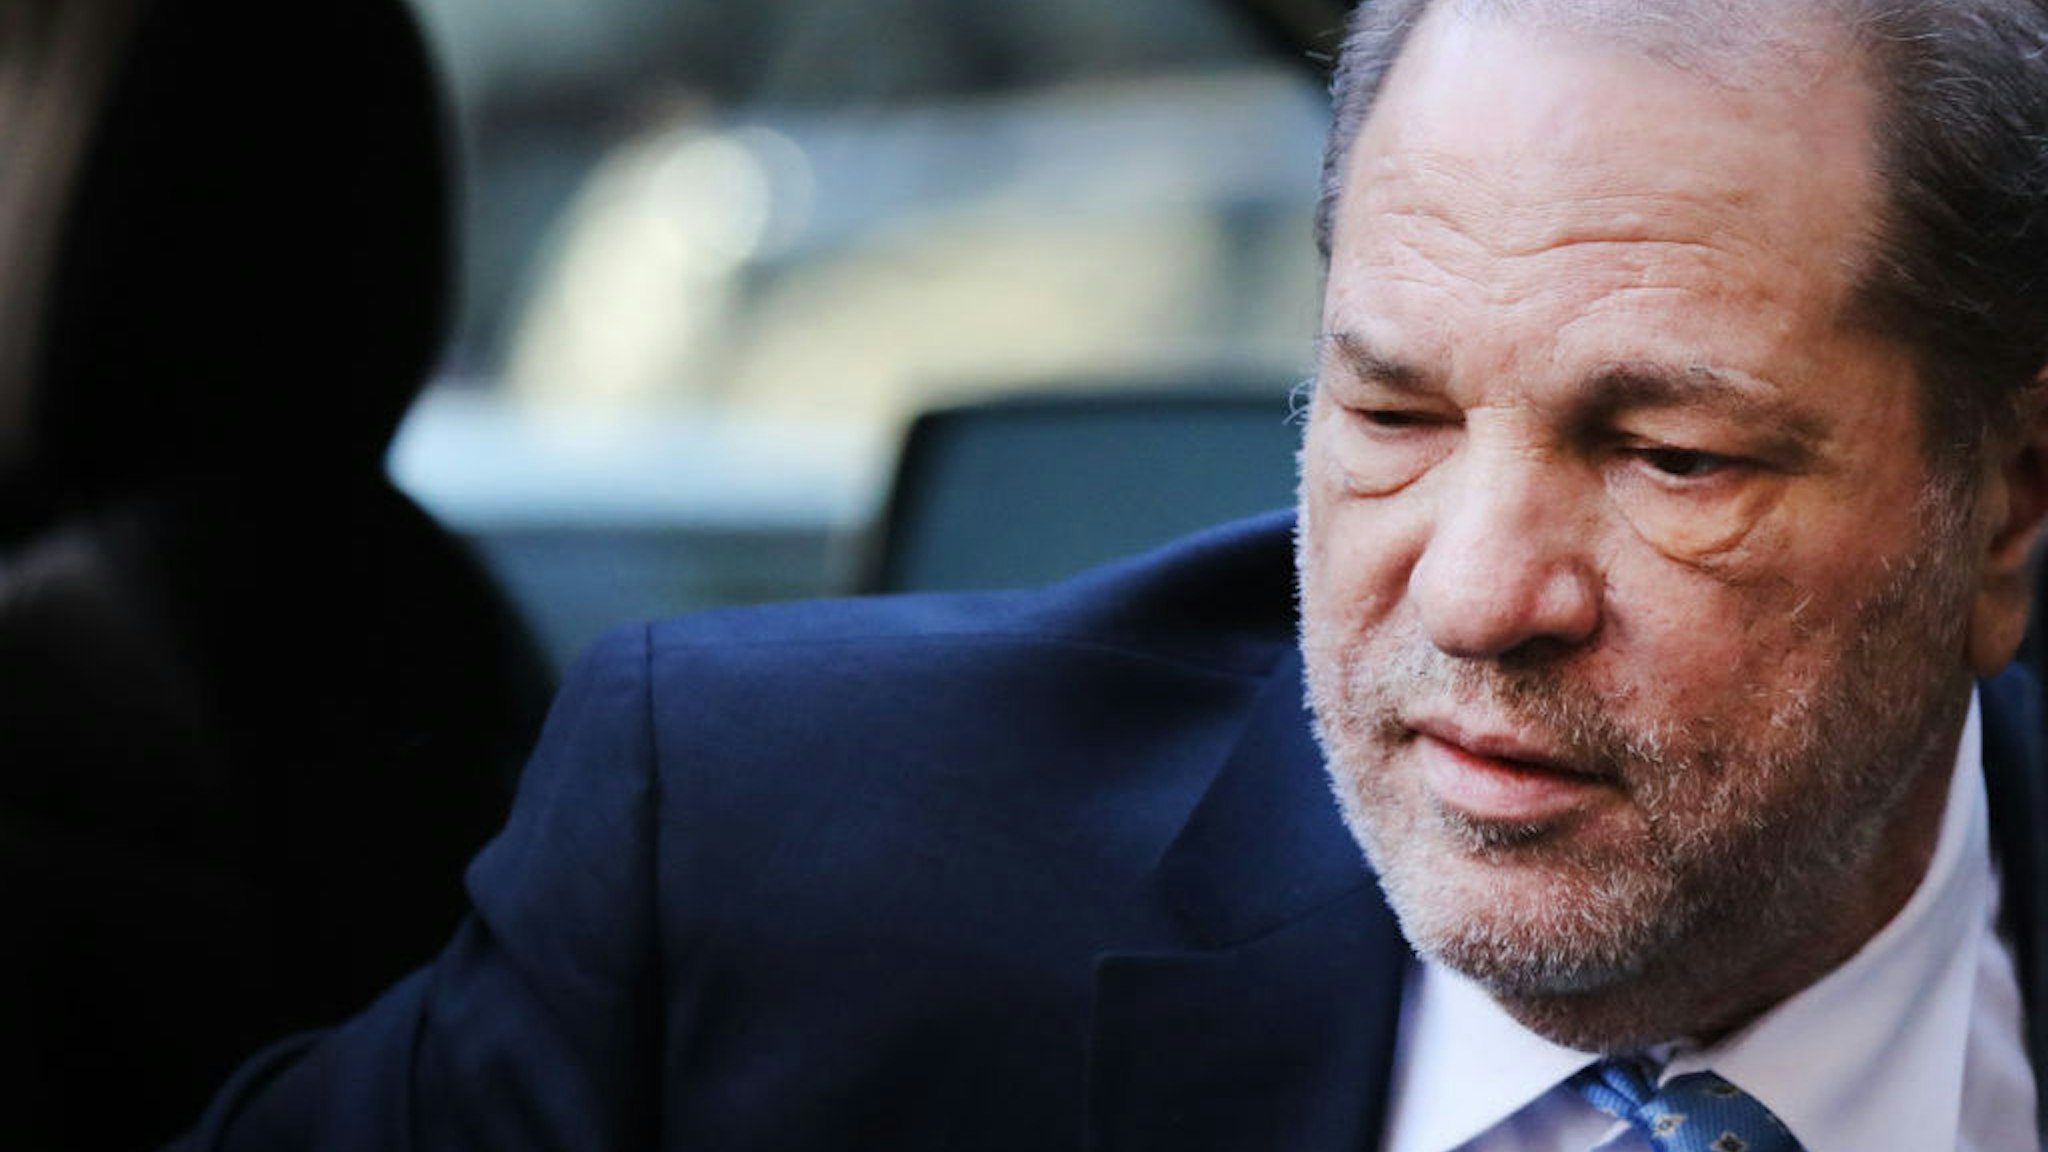 Harvey Weinstein enters a Manhattan court house as a jury continues with deliberations in his trial on February 24, 2020 in New York City. On Friday the judge asked the jury to keep deliberating after they announced that they are deadlocked on the charges of predatory sexual assault. Weinstein, a movie producer whose alleged sexual misconduct helped spark the #MeToo movement, pleaded not-guilty on five counts of rape and sexual assault against two unnamed women and faces a possible life sentence in prison. (Photo by Spencer Platt/Getty Images)